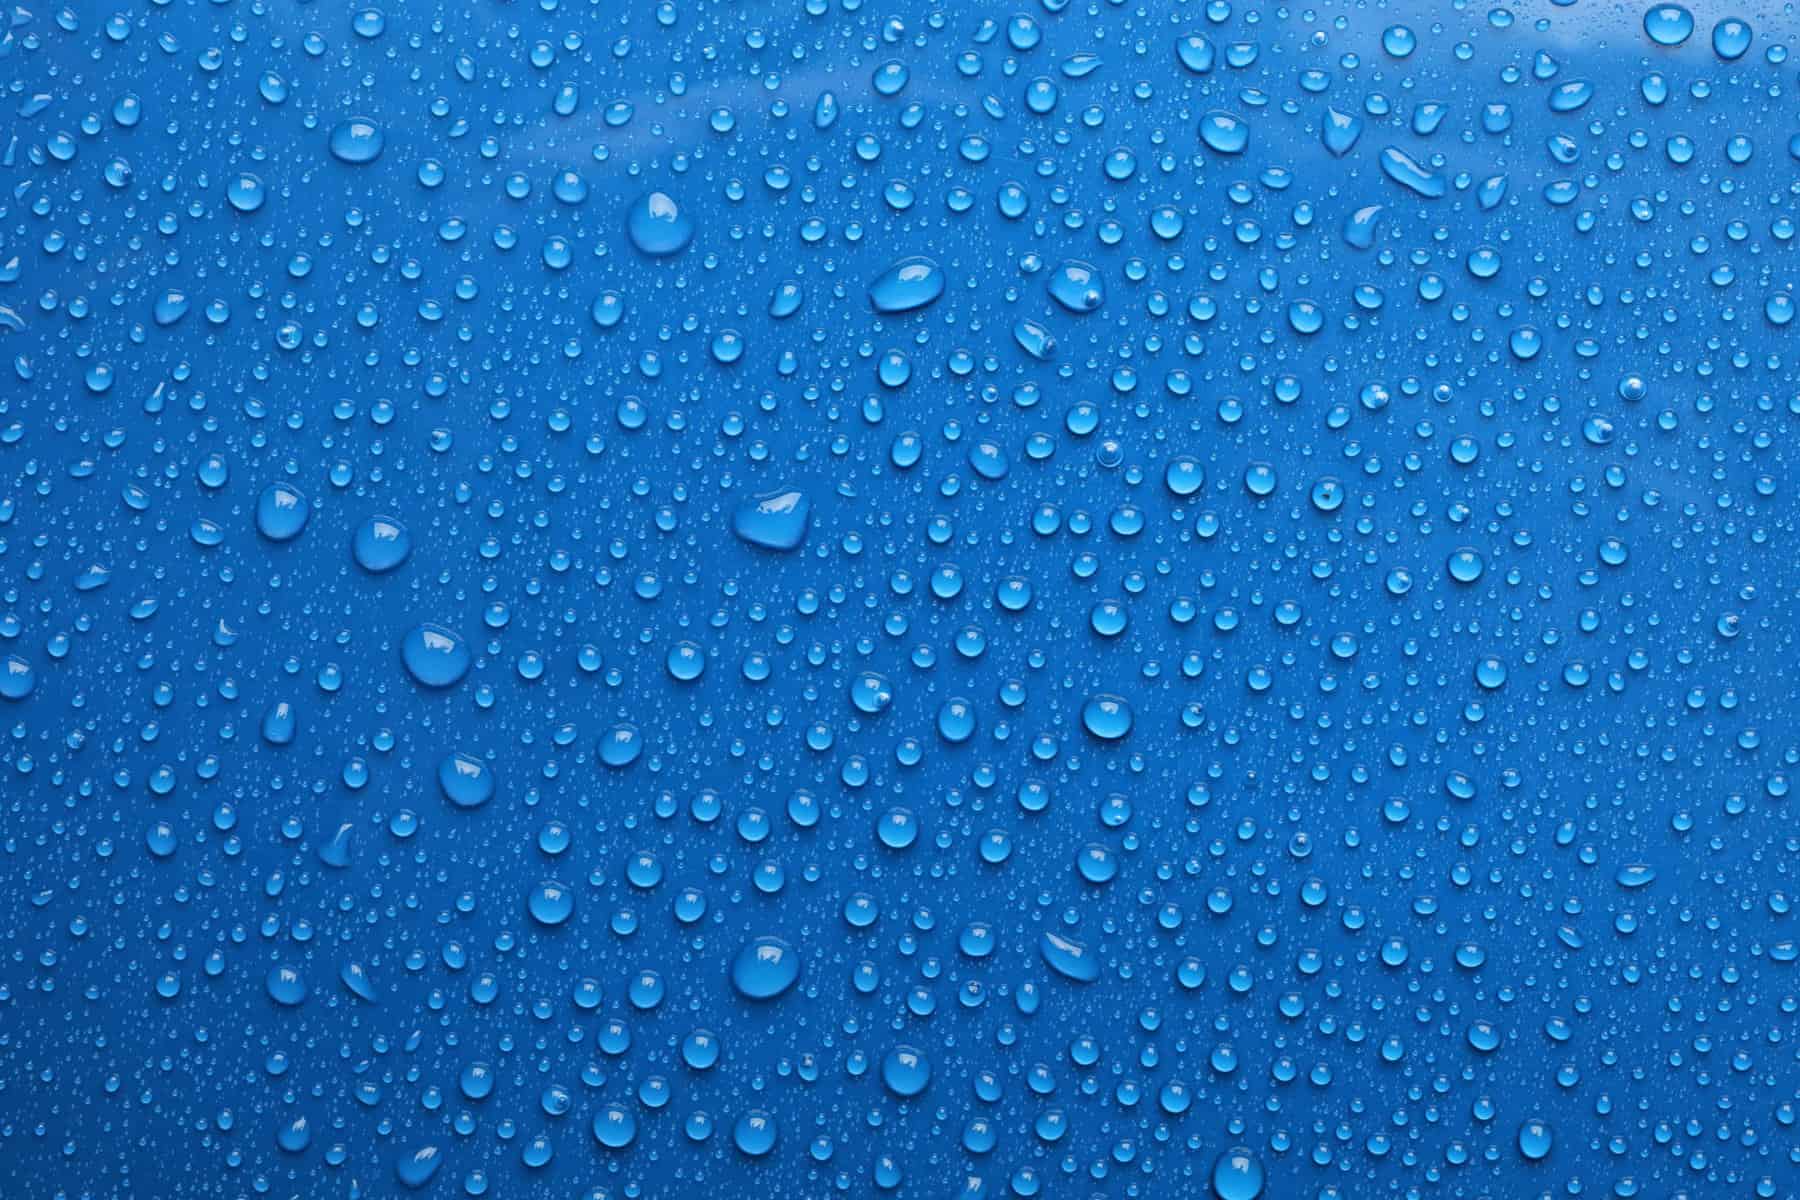 Water Drops On Blue Background Top View Civil Structural Engineer Magazine